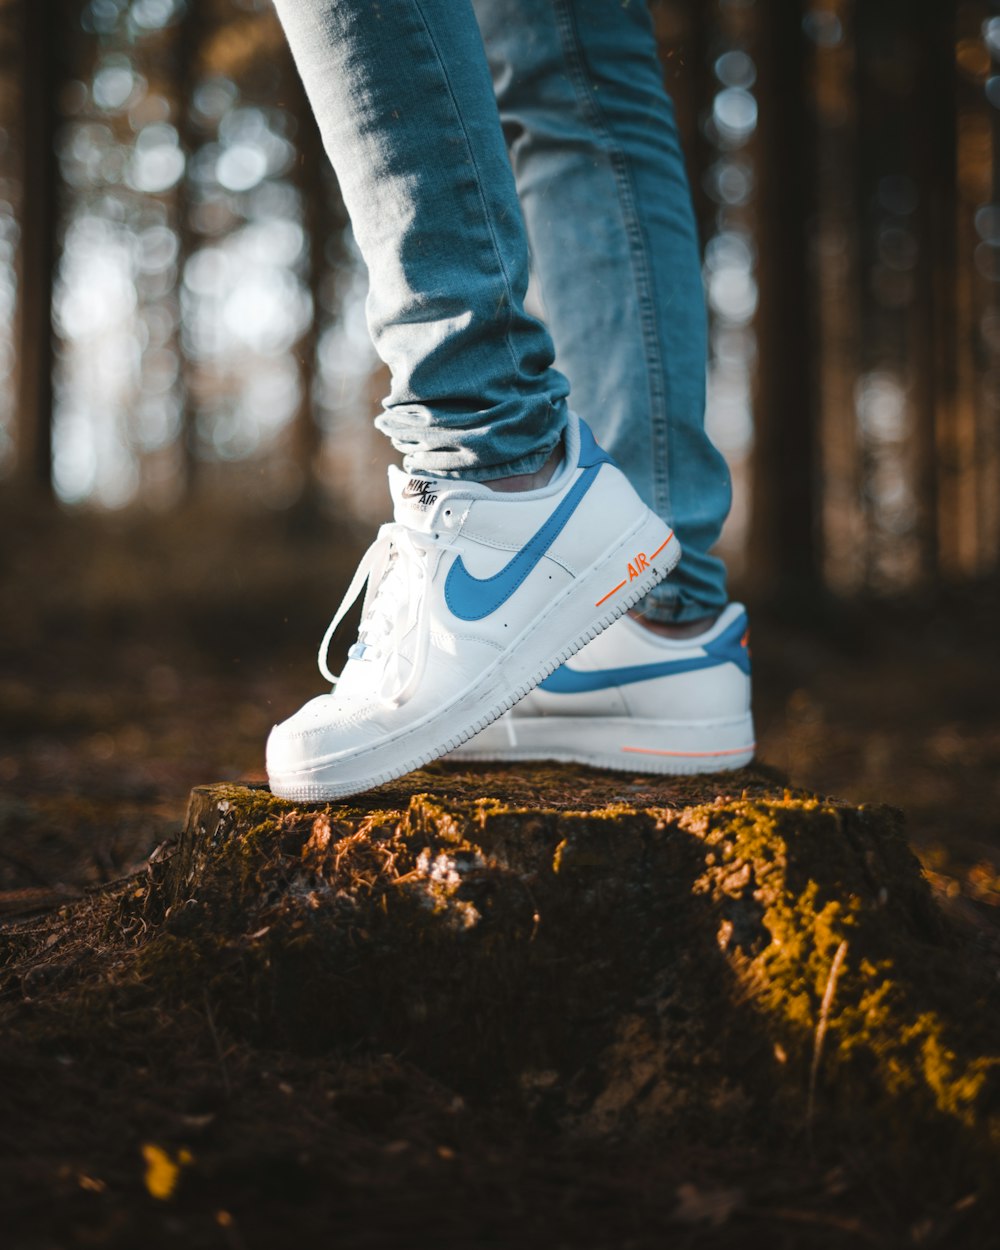 person wearing blue denim jeans and white Nike Air Max shoes standing on  tree stomp photo – Free Teal Image on Unsplash